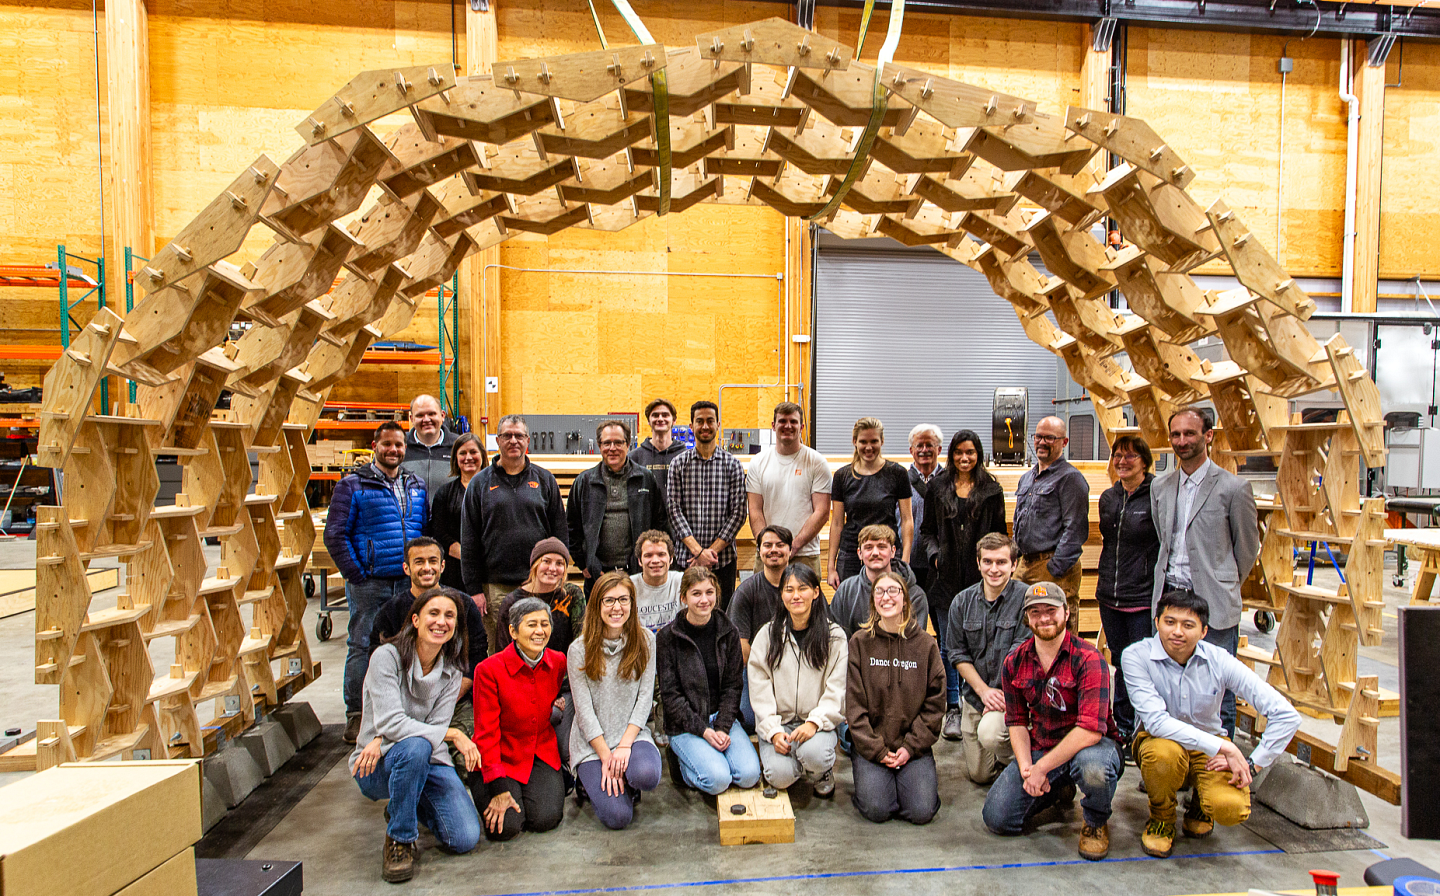 Group photo of UO and OSU students under their full-scale covered, wooden, accordion-life shelter